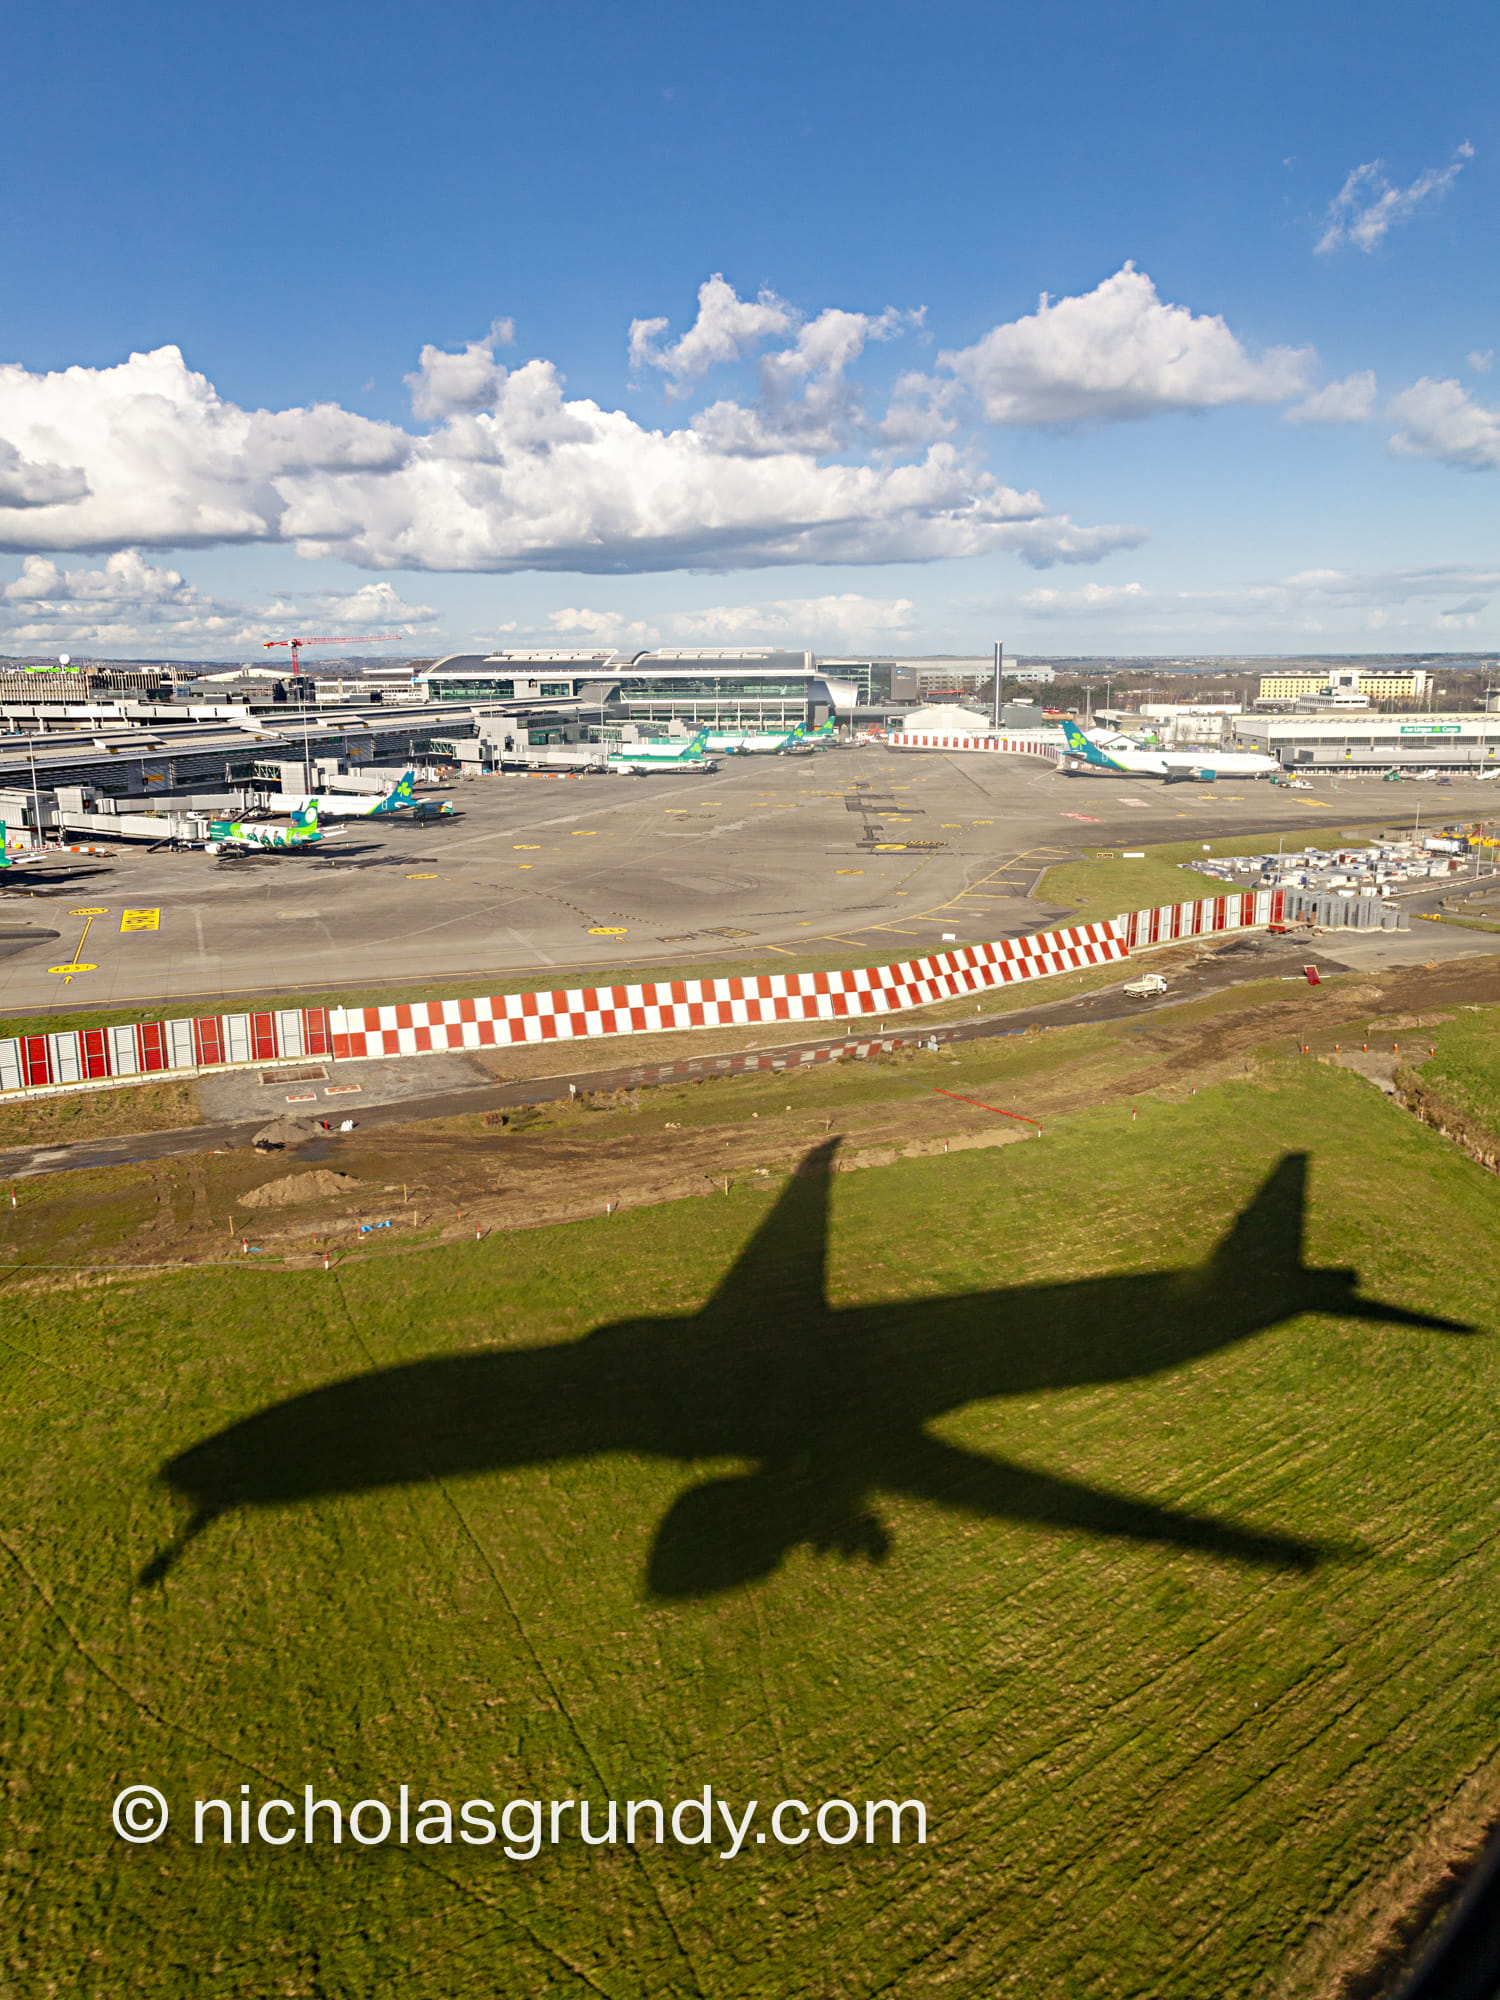 Commercial Photographer Galway Plane Landing Shadow